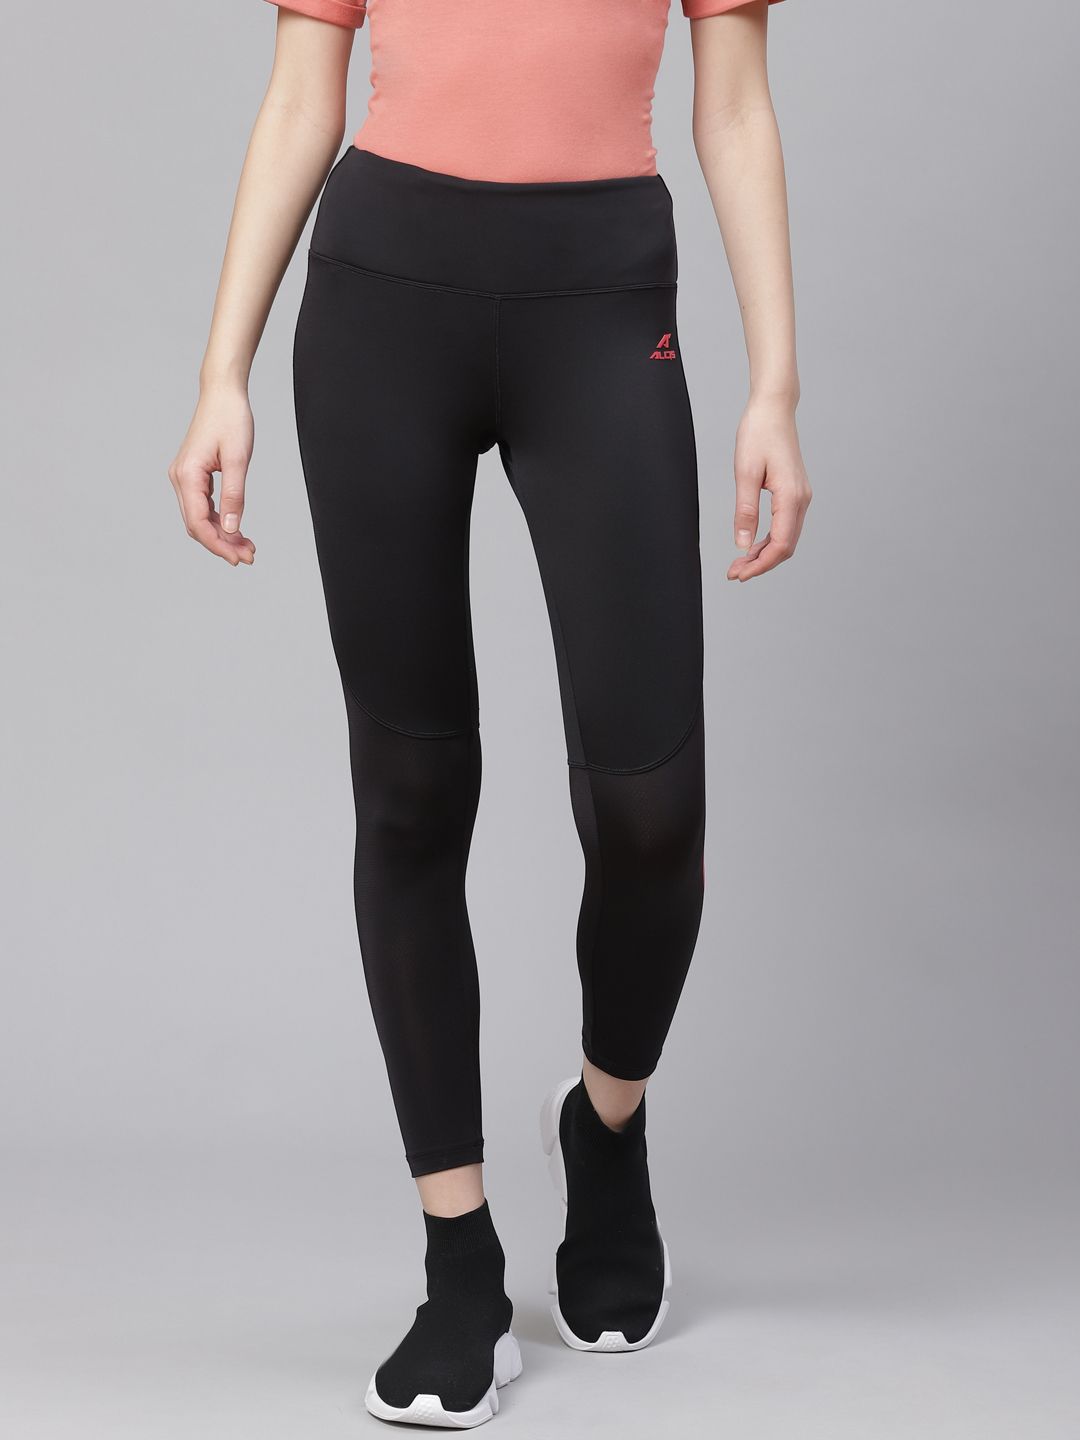 Alcis Women Black Solid Cropped Training Tights Price in India